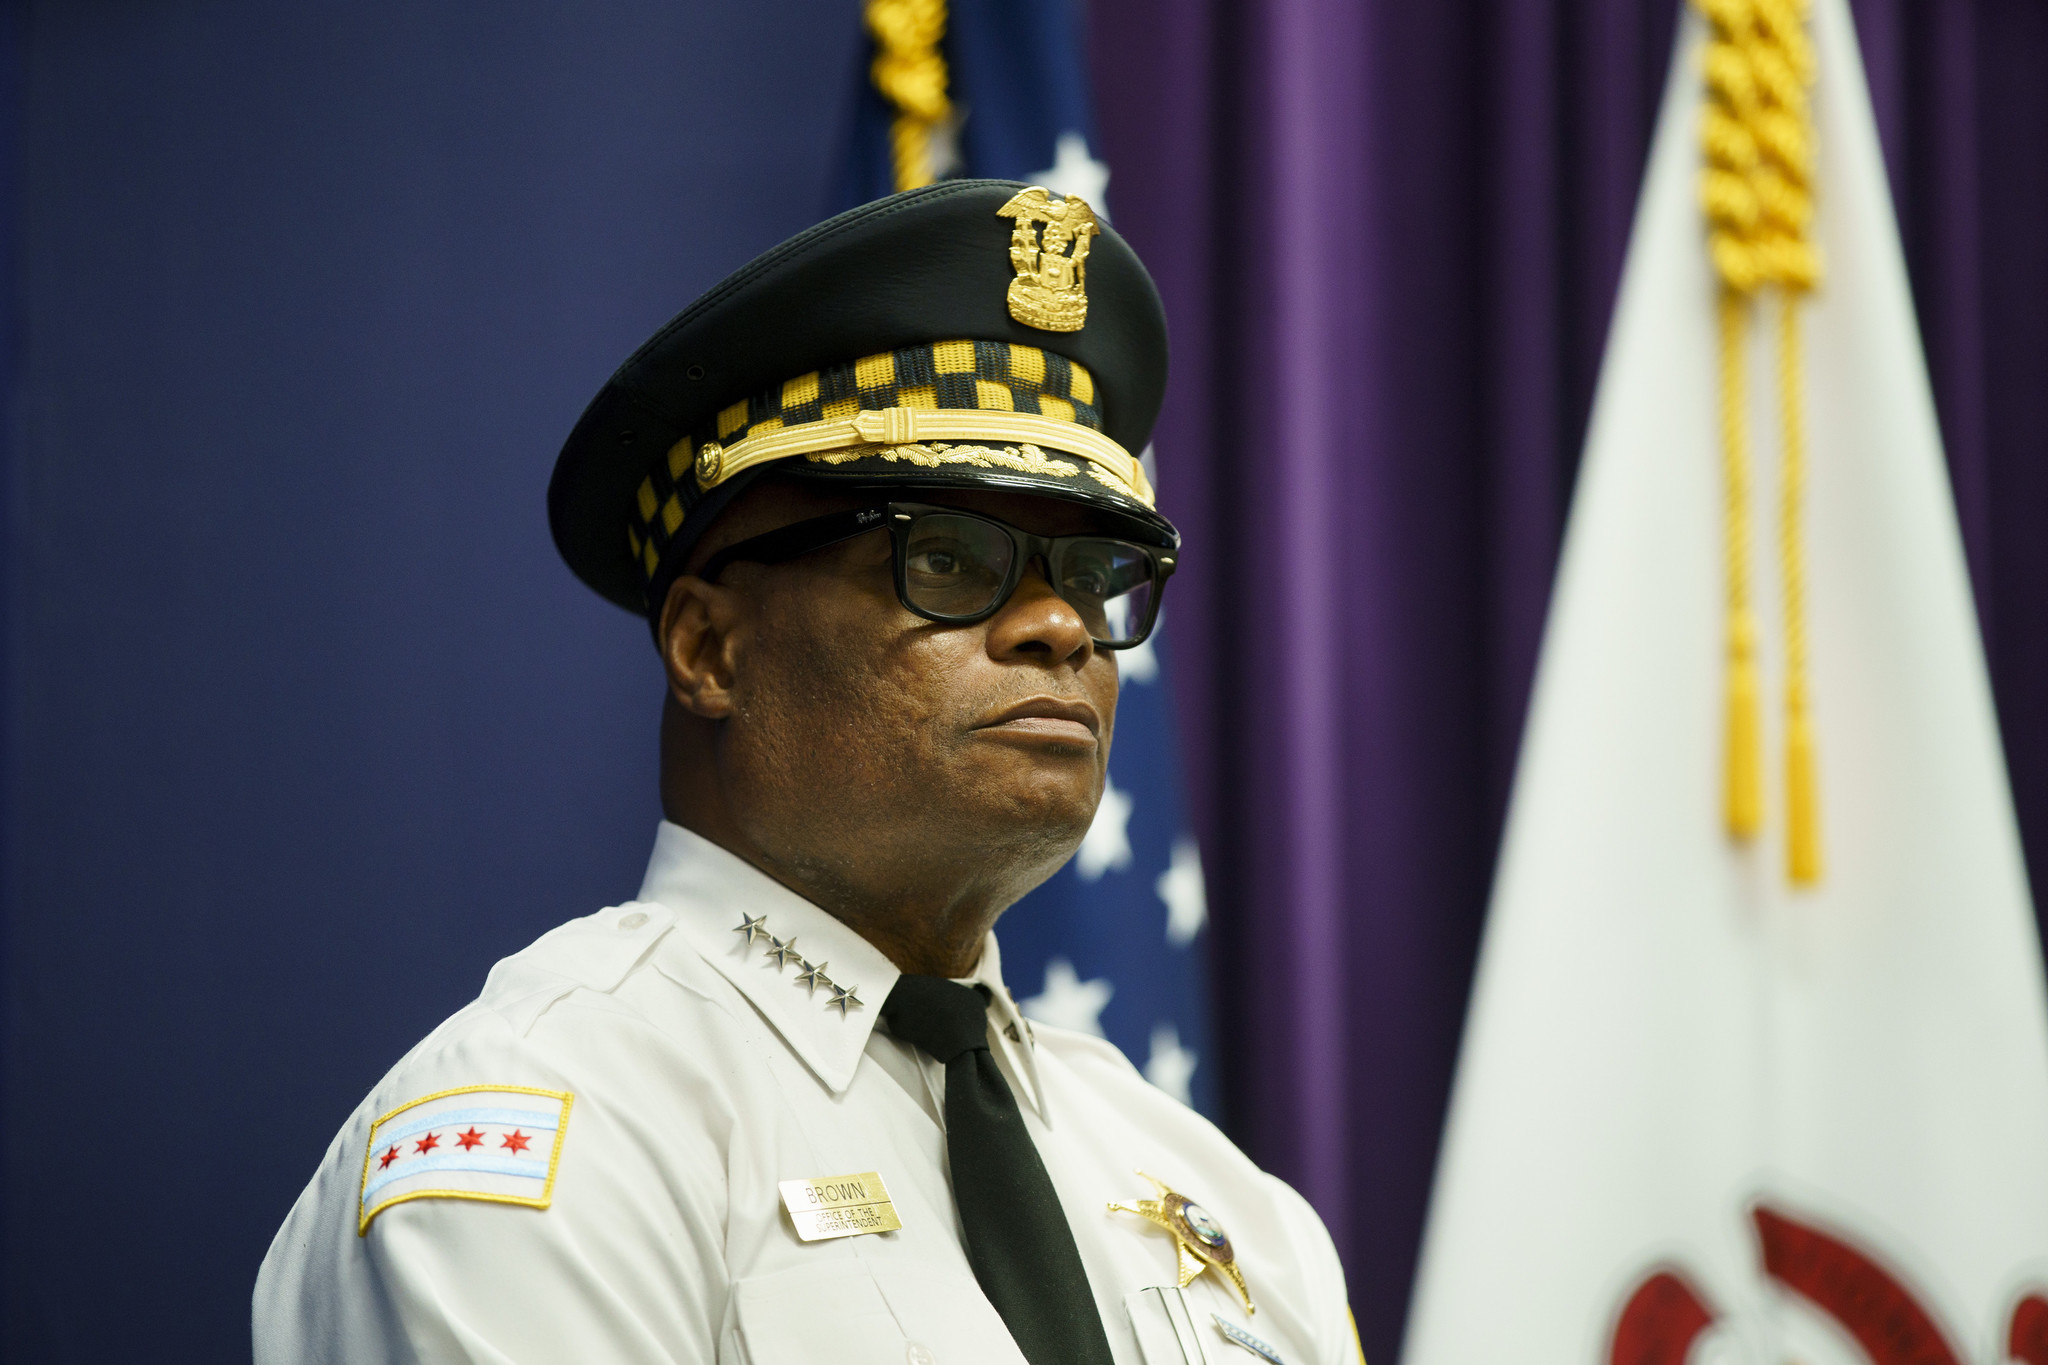 Charlie Beck Steps Down as David Brown Becomes Chicago's New Top Cop, Chicago News